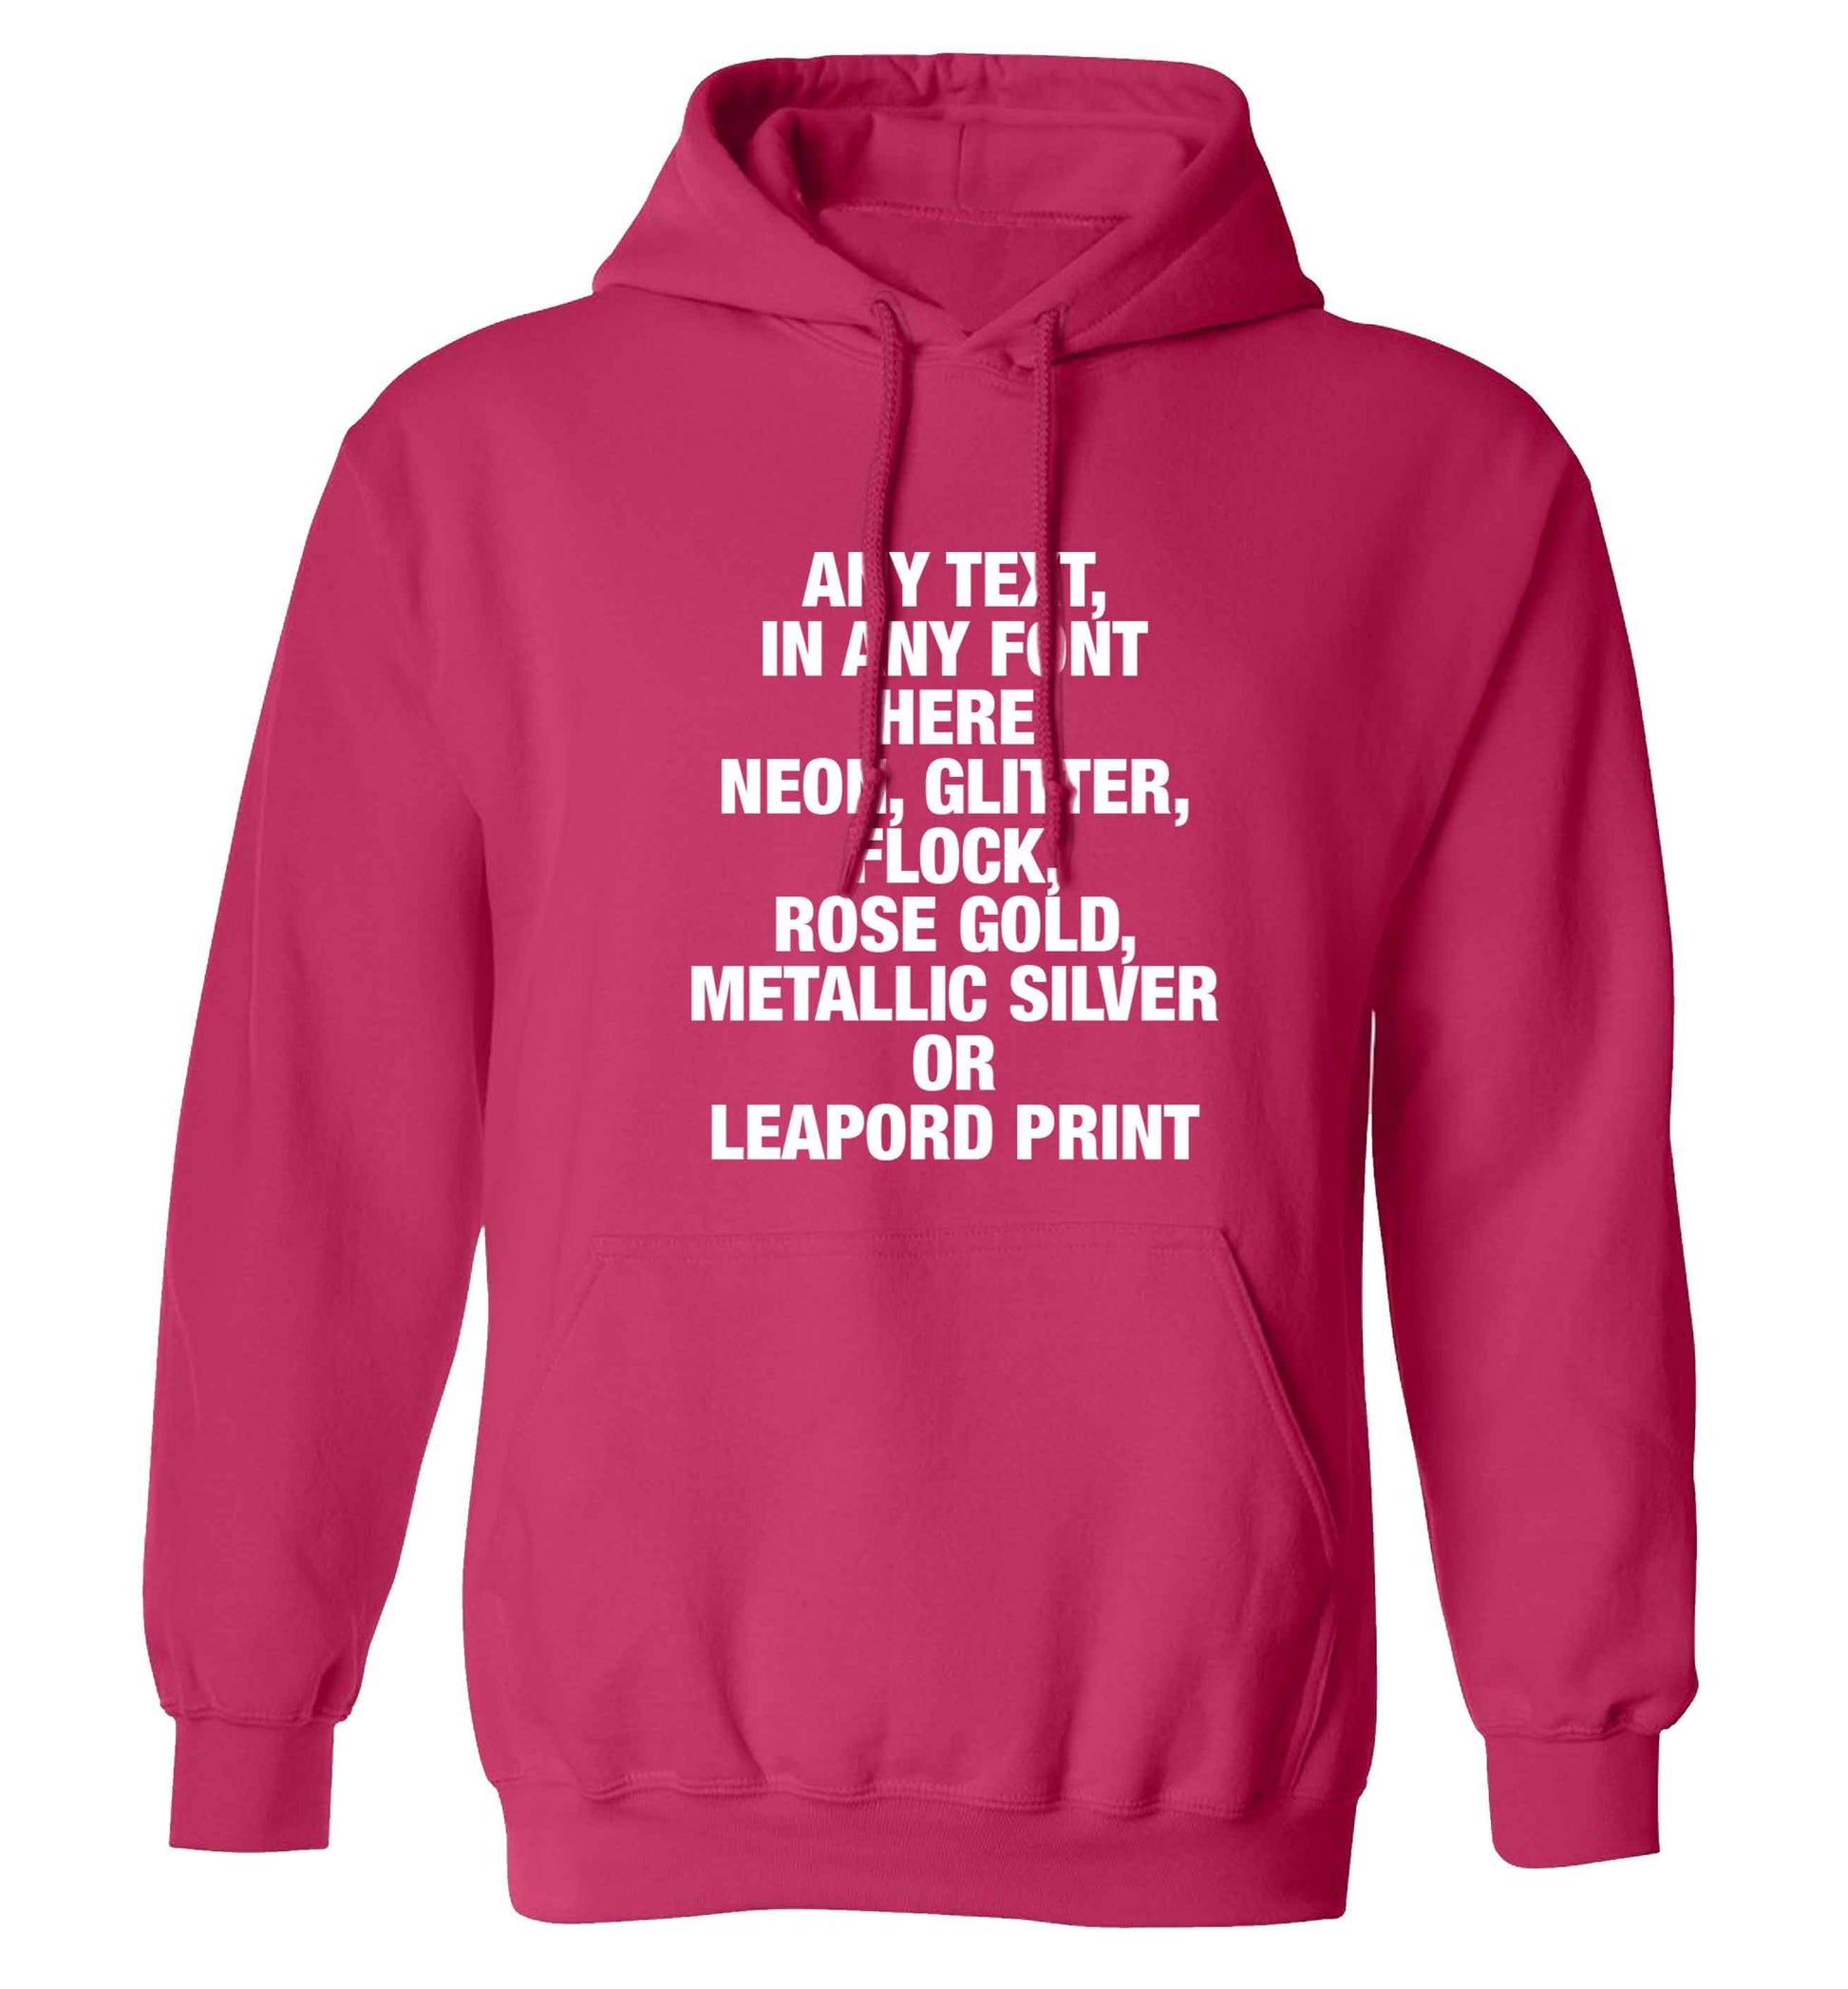 Premium custom order any text colour and font adults unisex pink hoodie 2XL